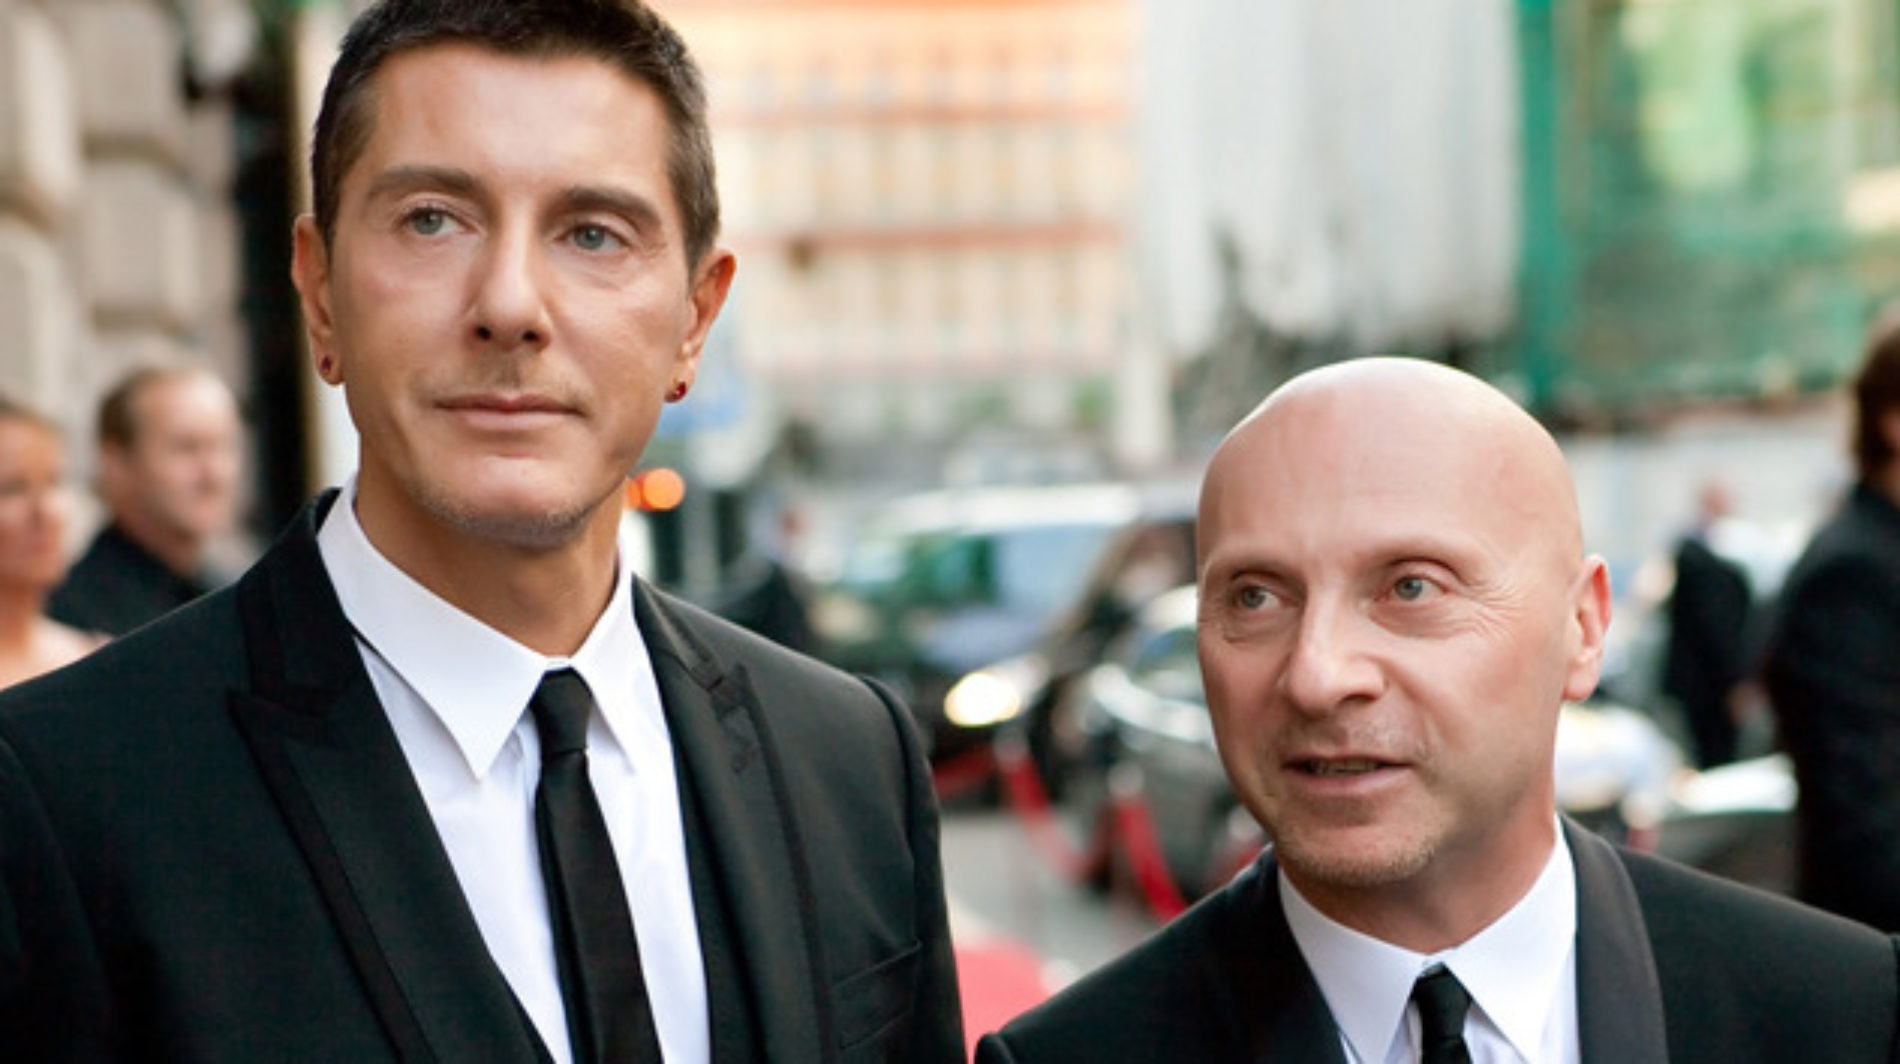 Dolce & Gabbana (Finally) Apologize For Their Anti-IVF and Gay Adoption Statements